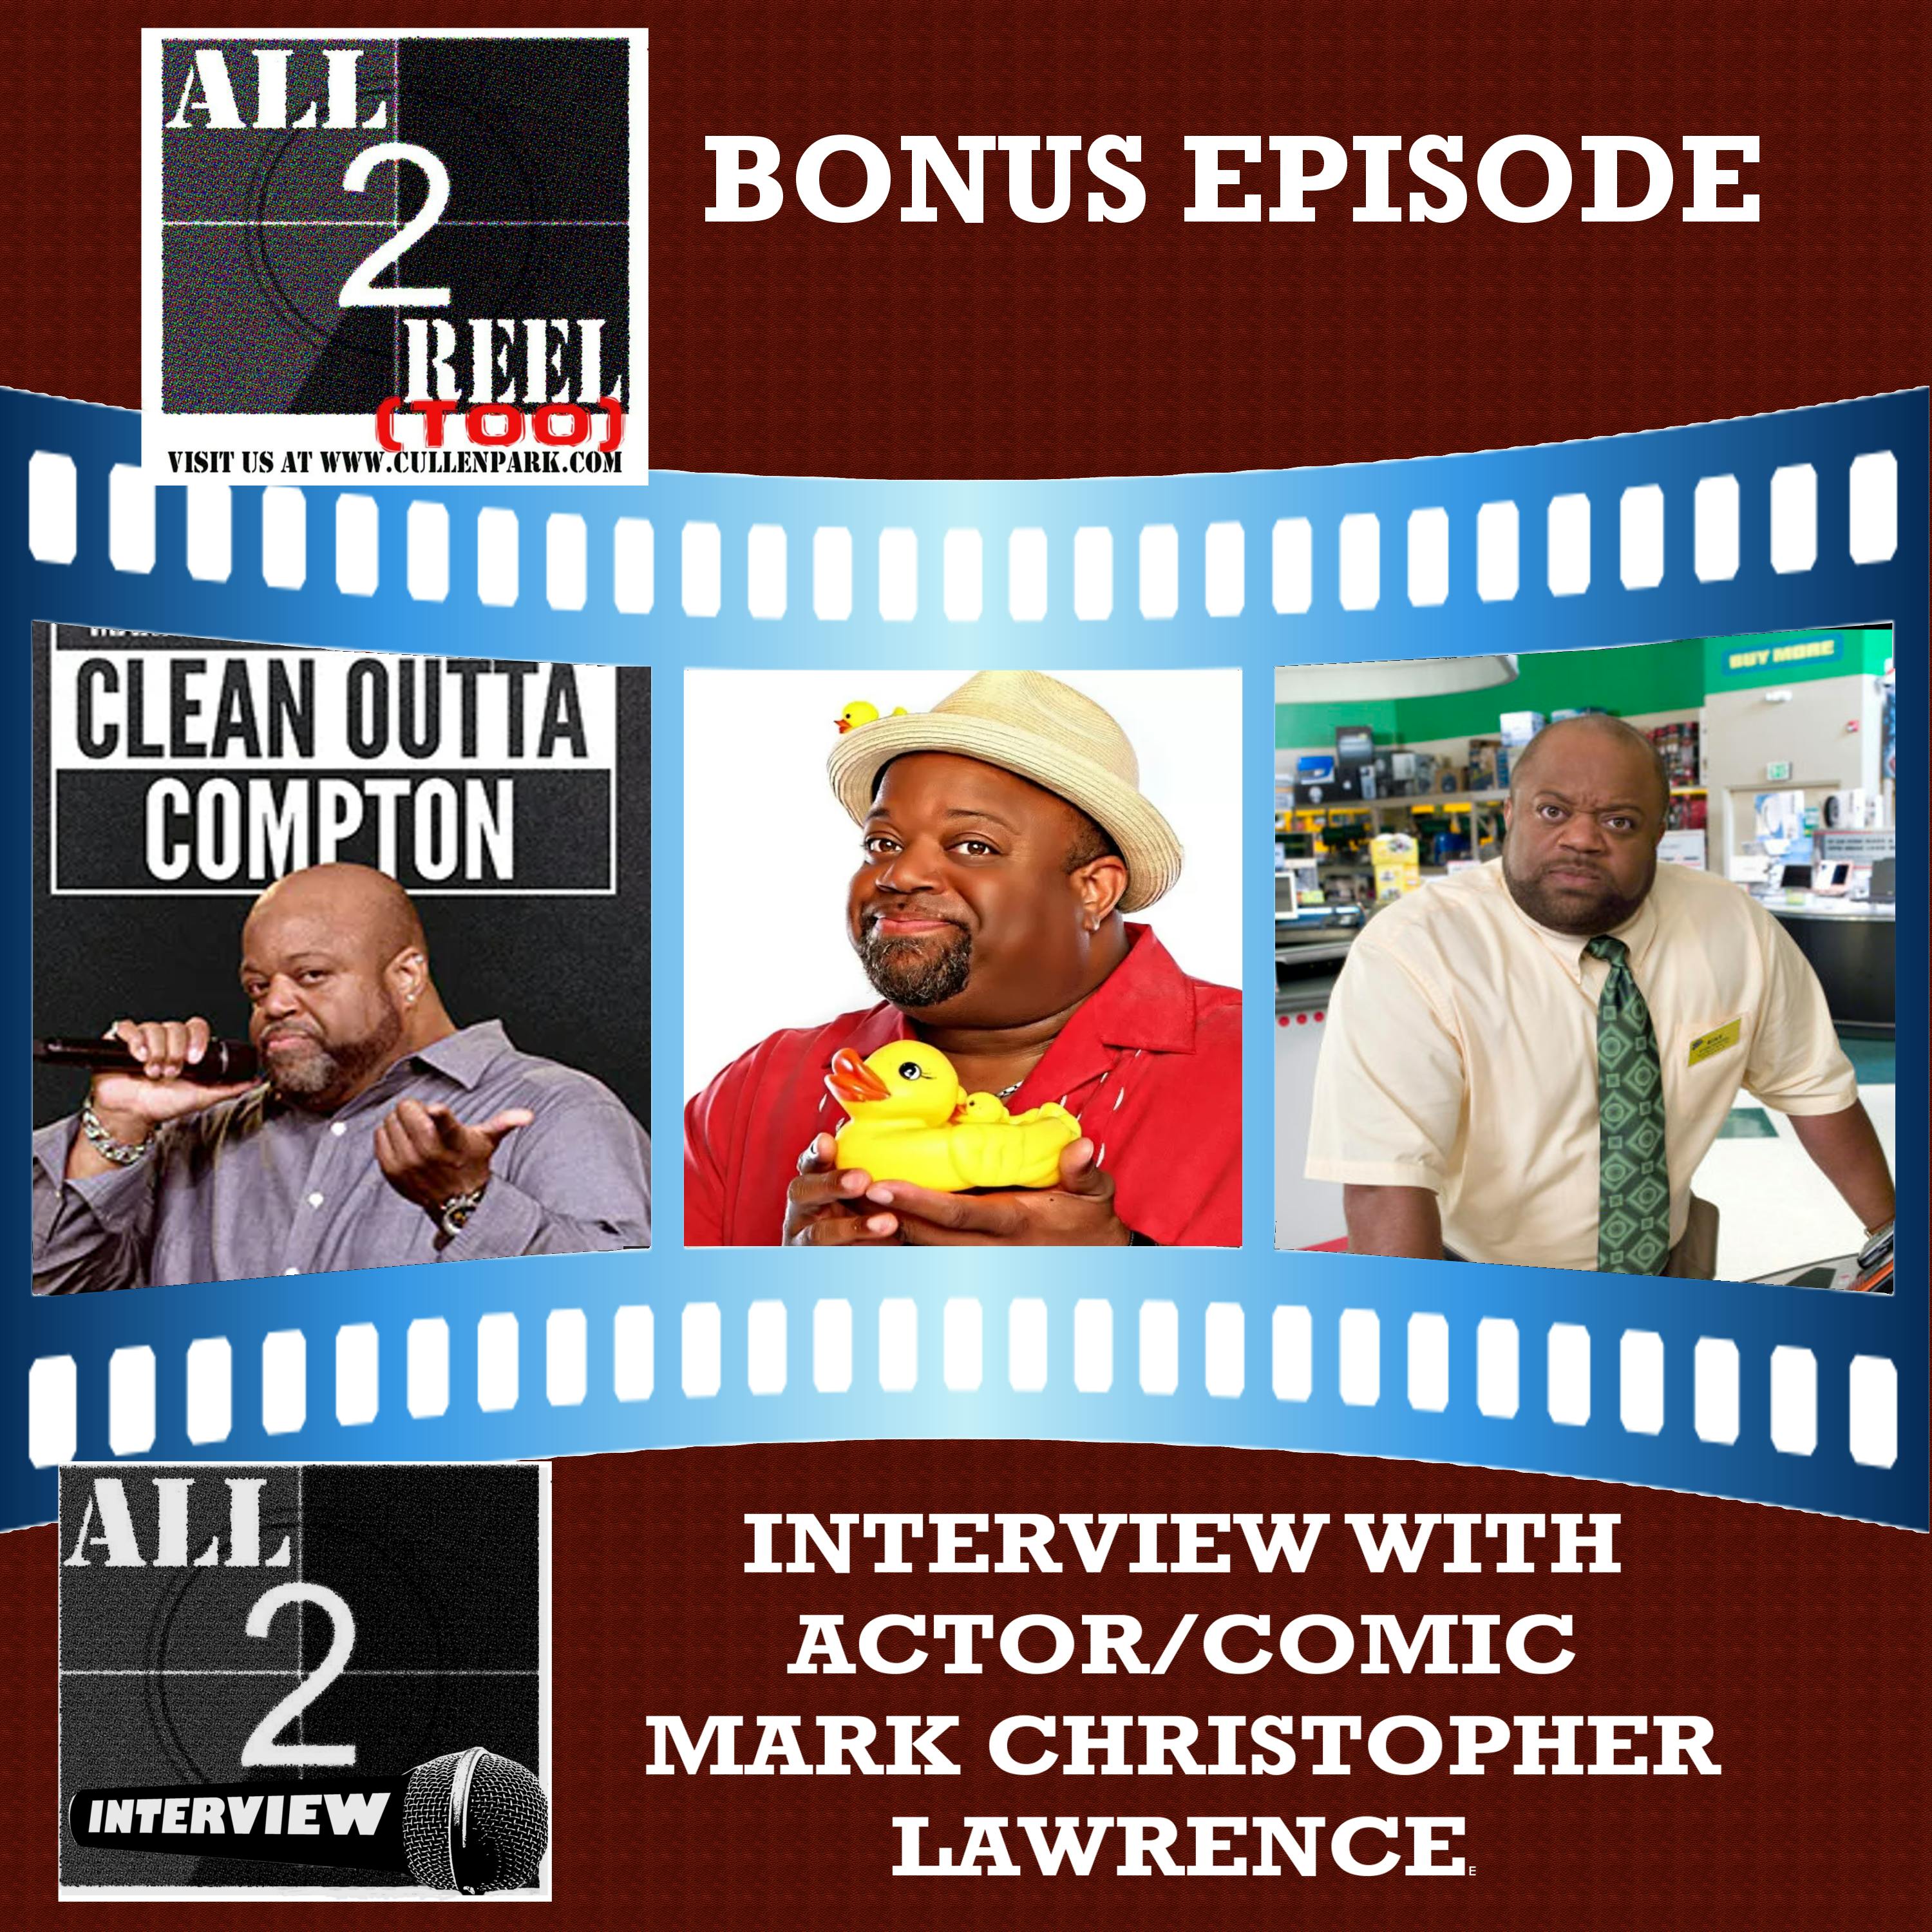 MARK CHRISTOPHER LAWRENCE INTERVIEW Image